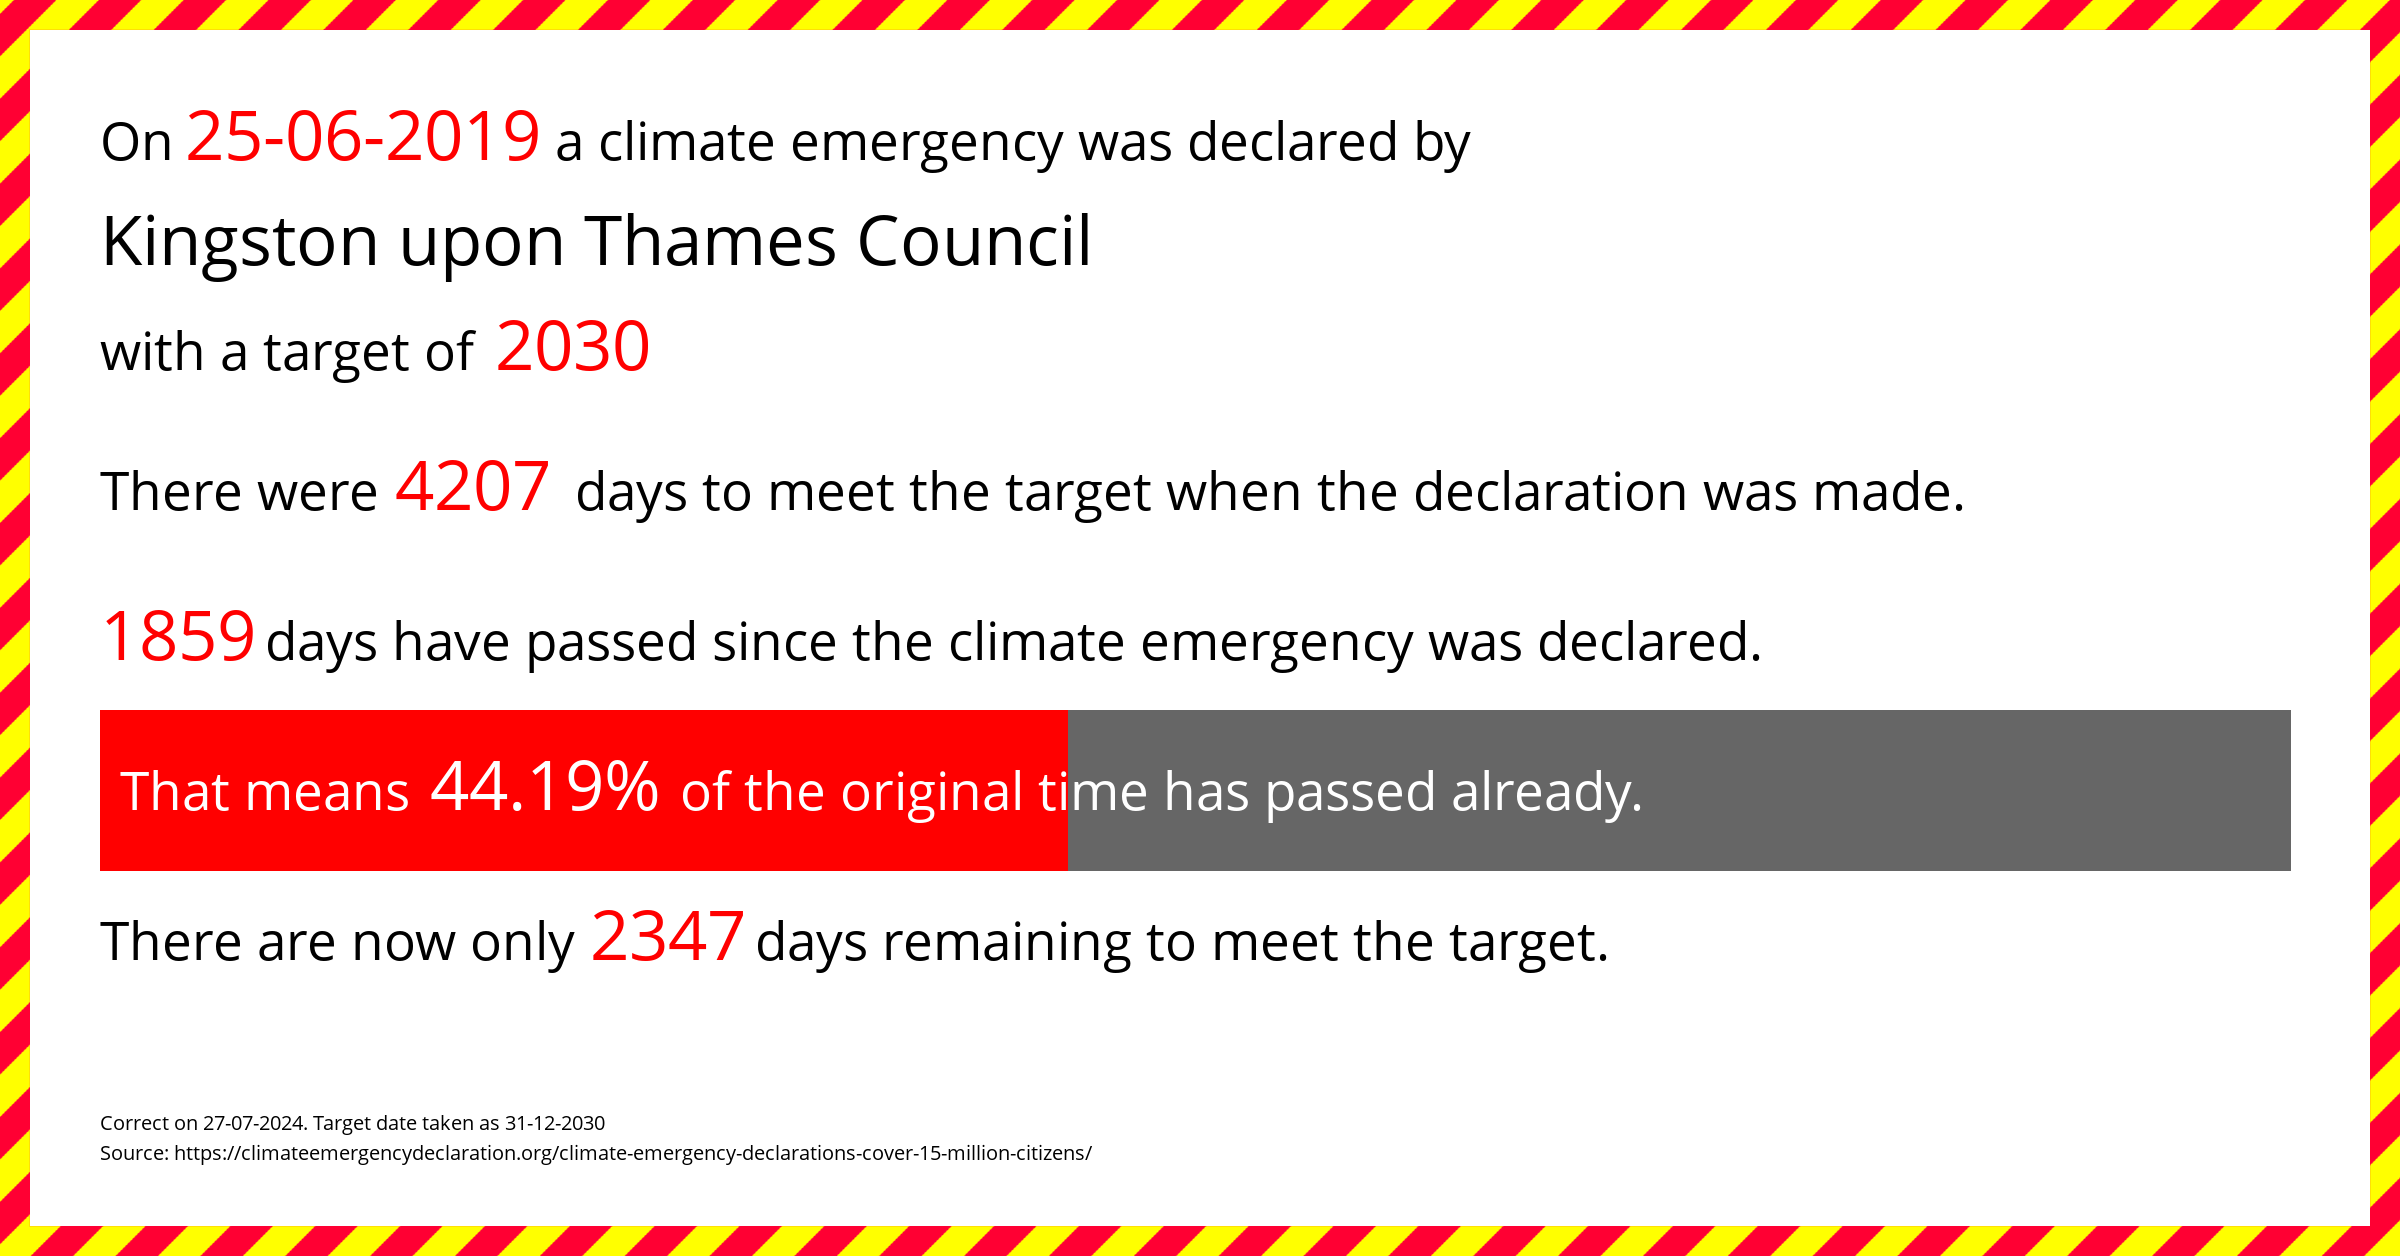 Kingston upon Thames Council declared a Climate emergency on Tuesday 25th June 2019, with a target of 2030.